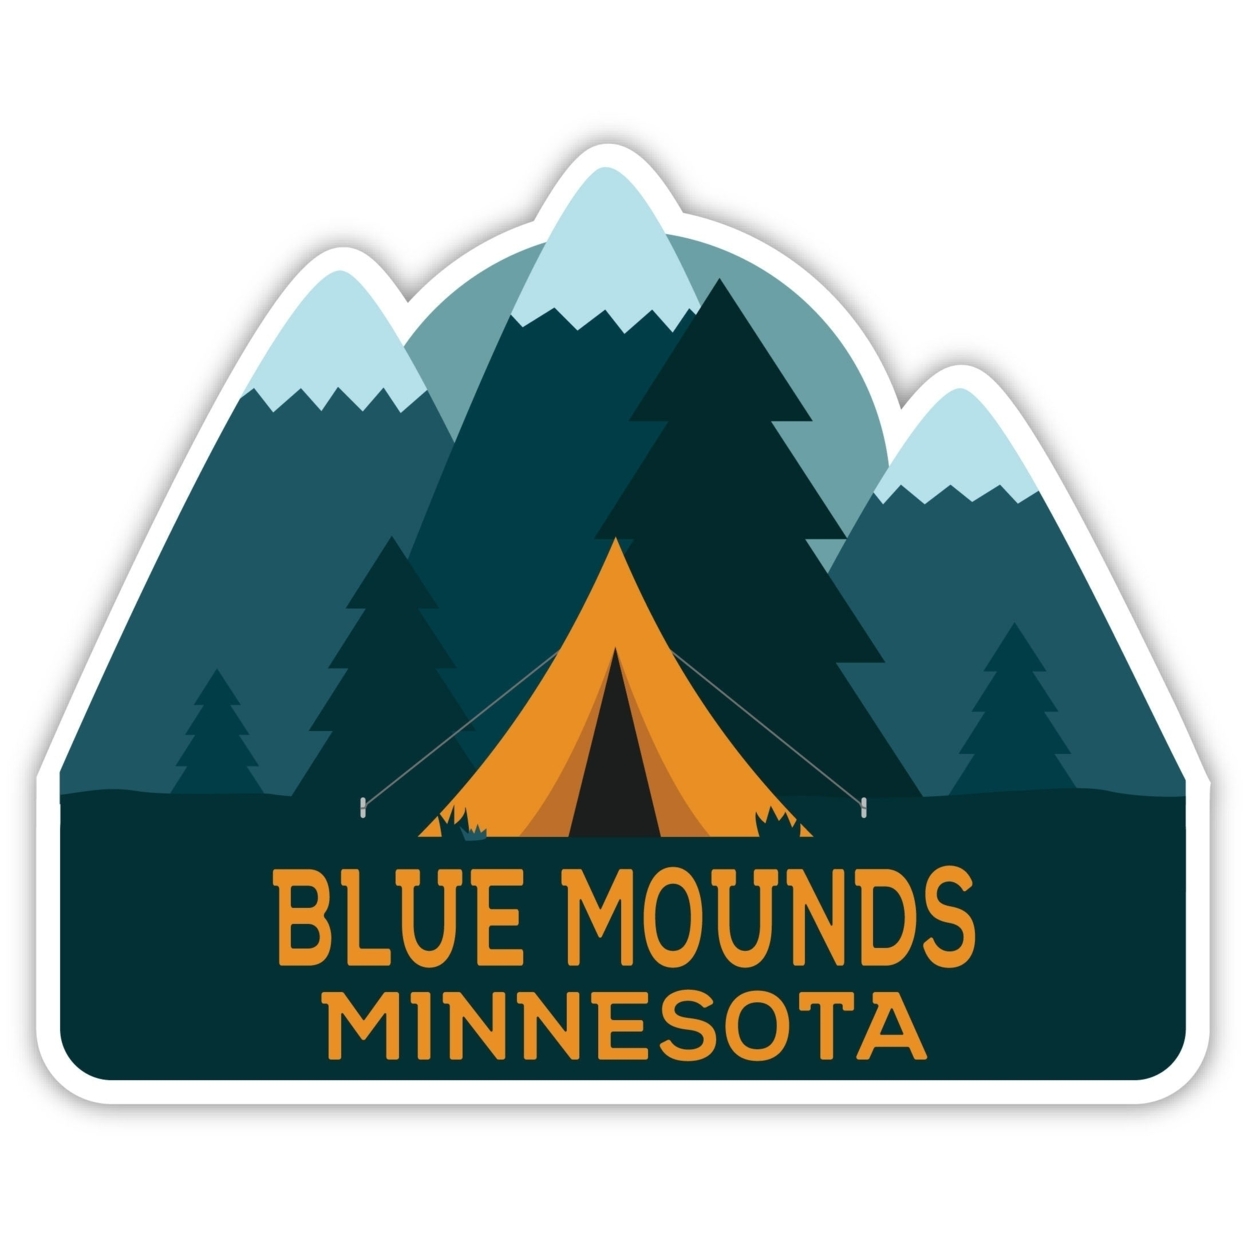 Blue Mounds Minnesota Souvenir Decorative Stickers (Choose Theme And Size) - 4-Pack, 4-Inch, Tent